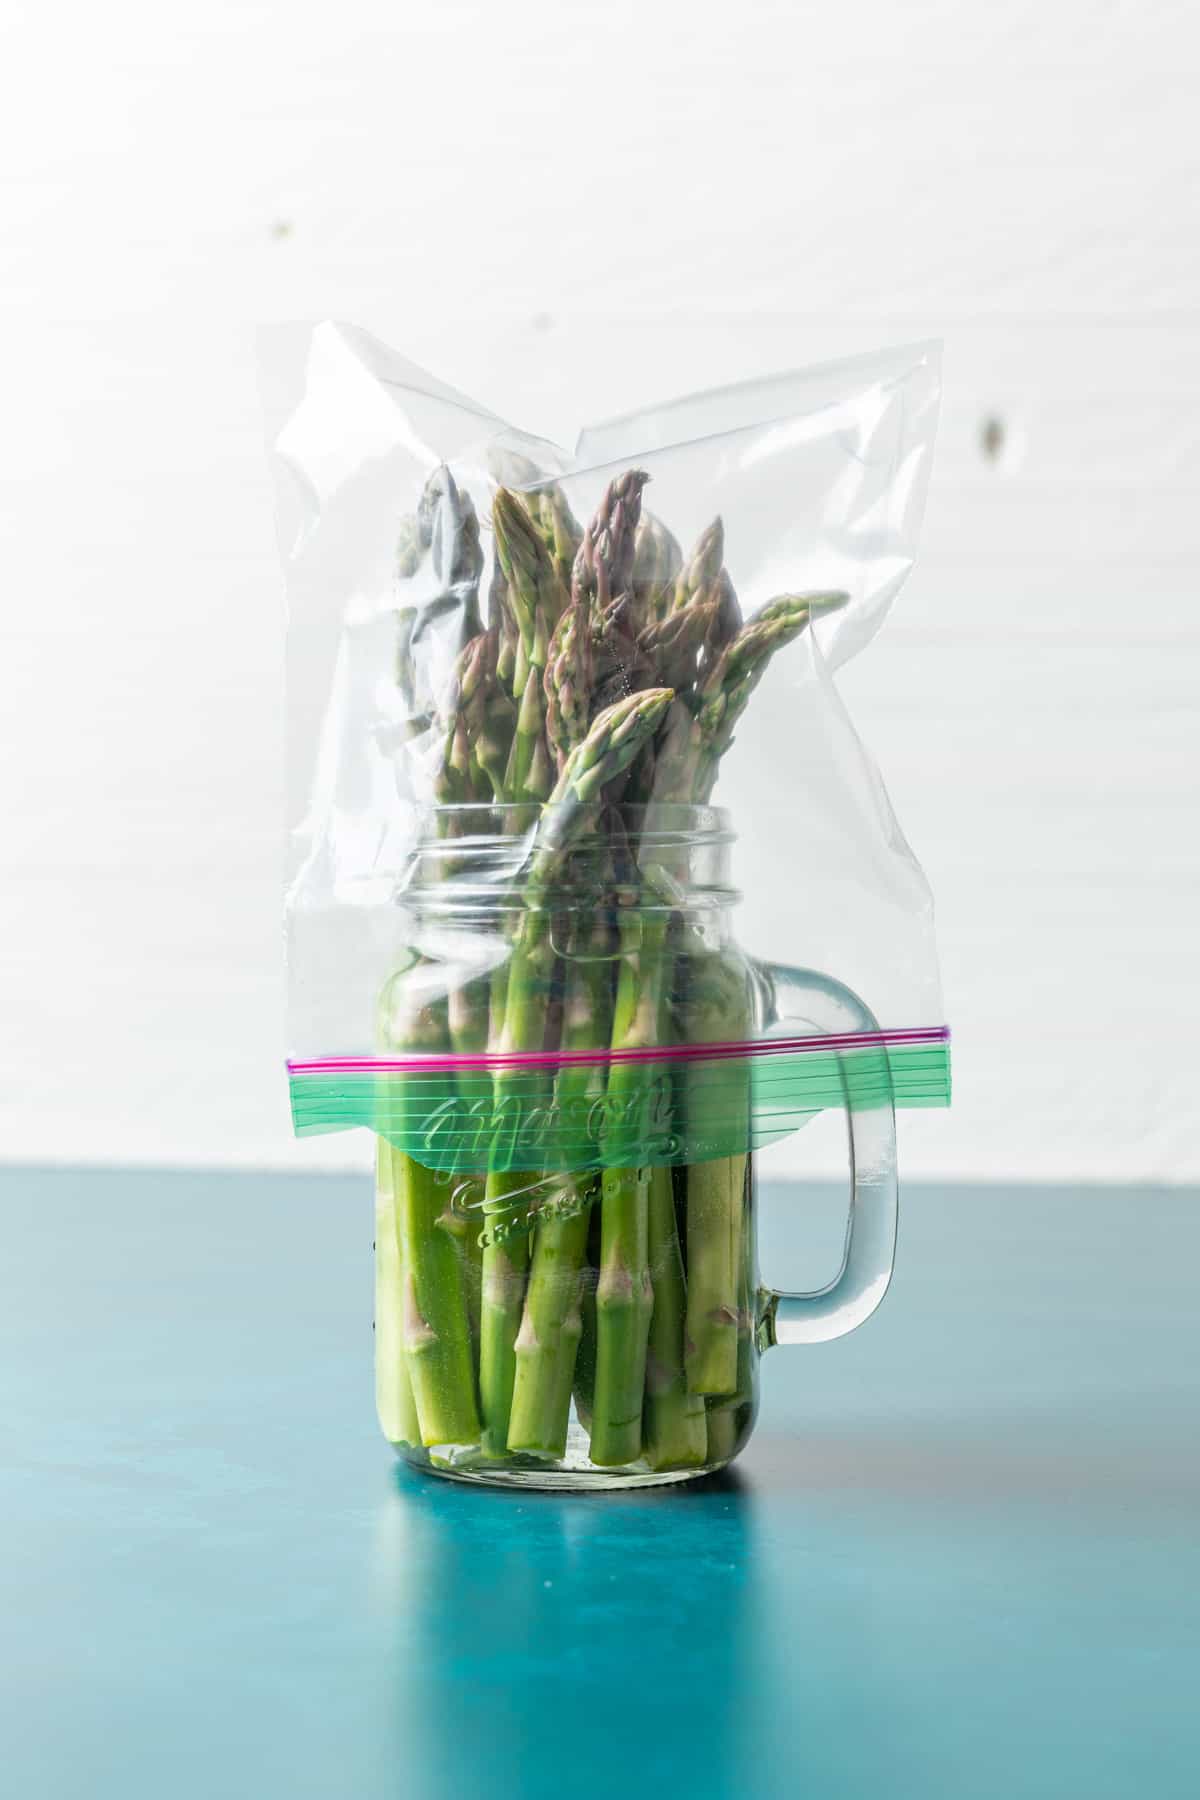 Asparagus stored in a glass jar with water and a plastic bag on top.